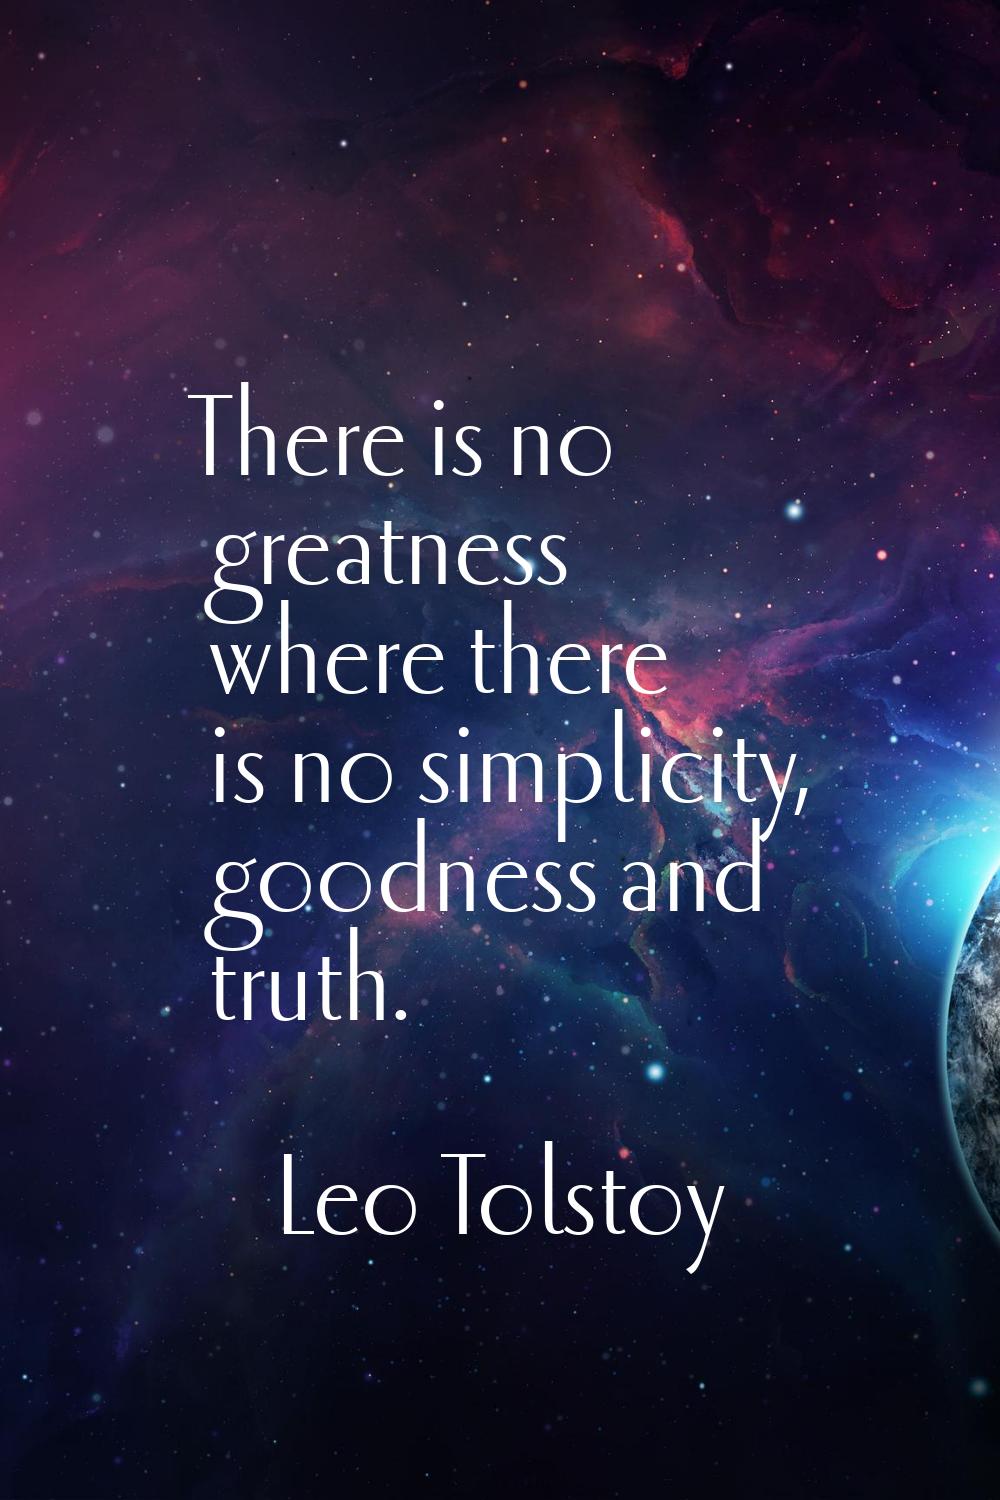 There is no greatness where there is no simplicity, goodness and truth.